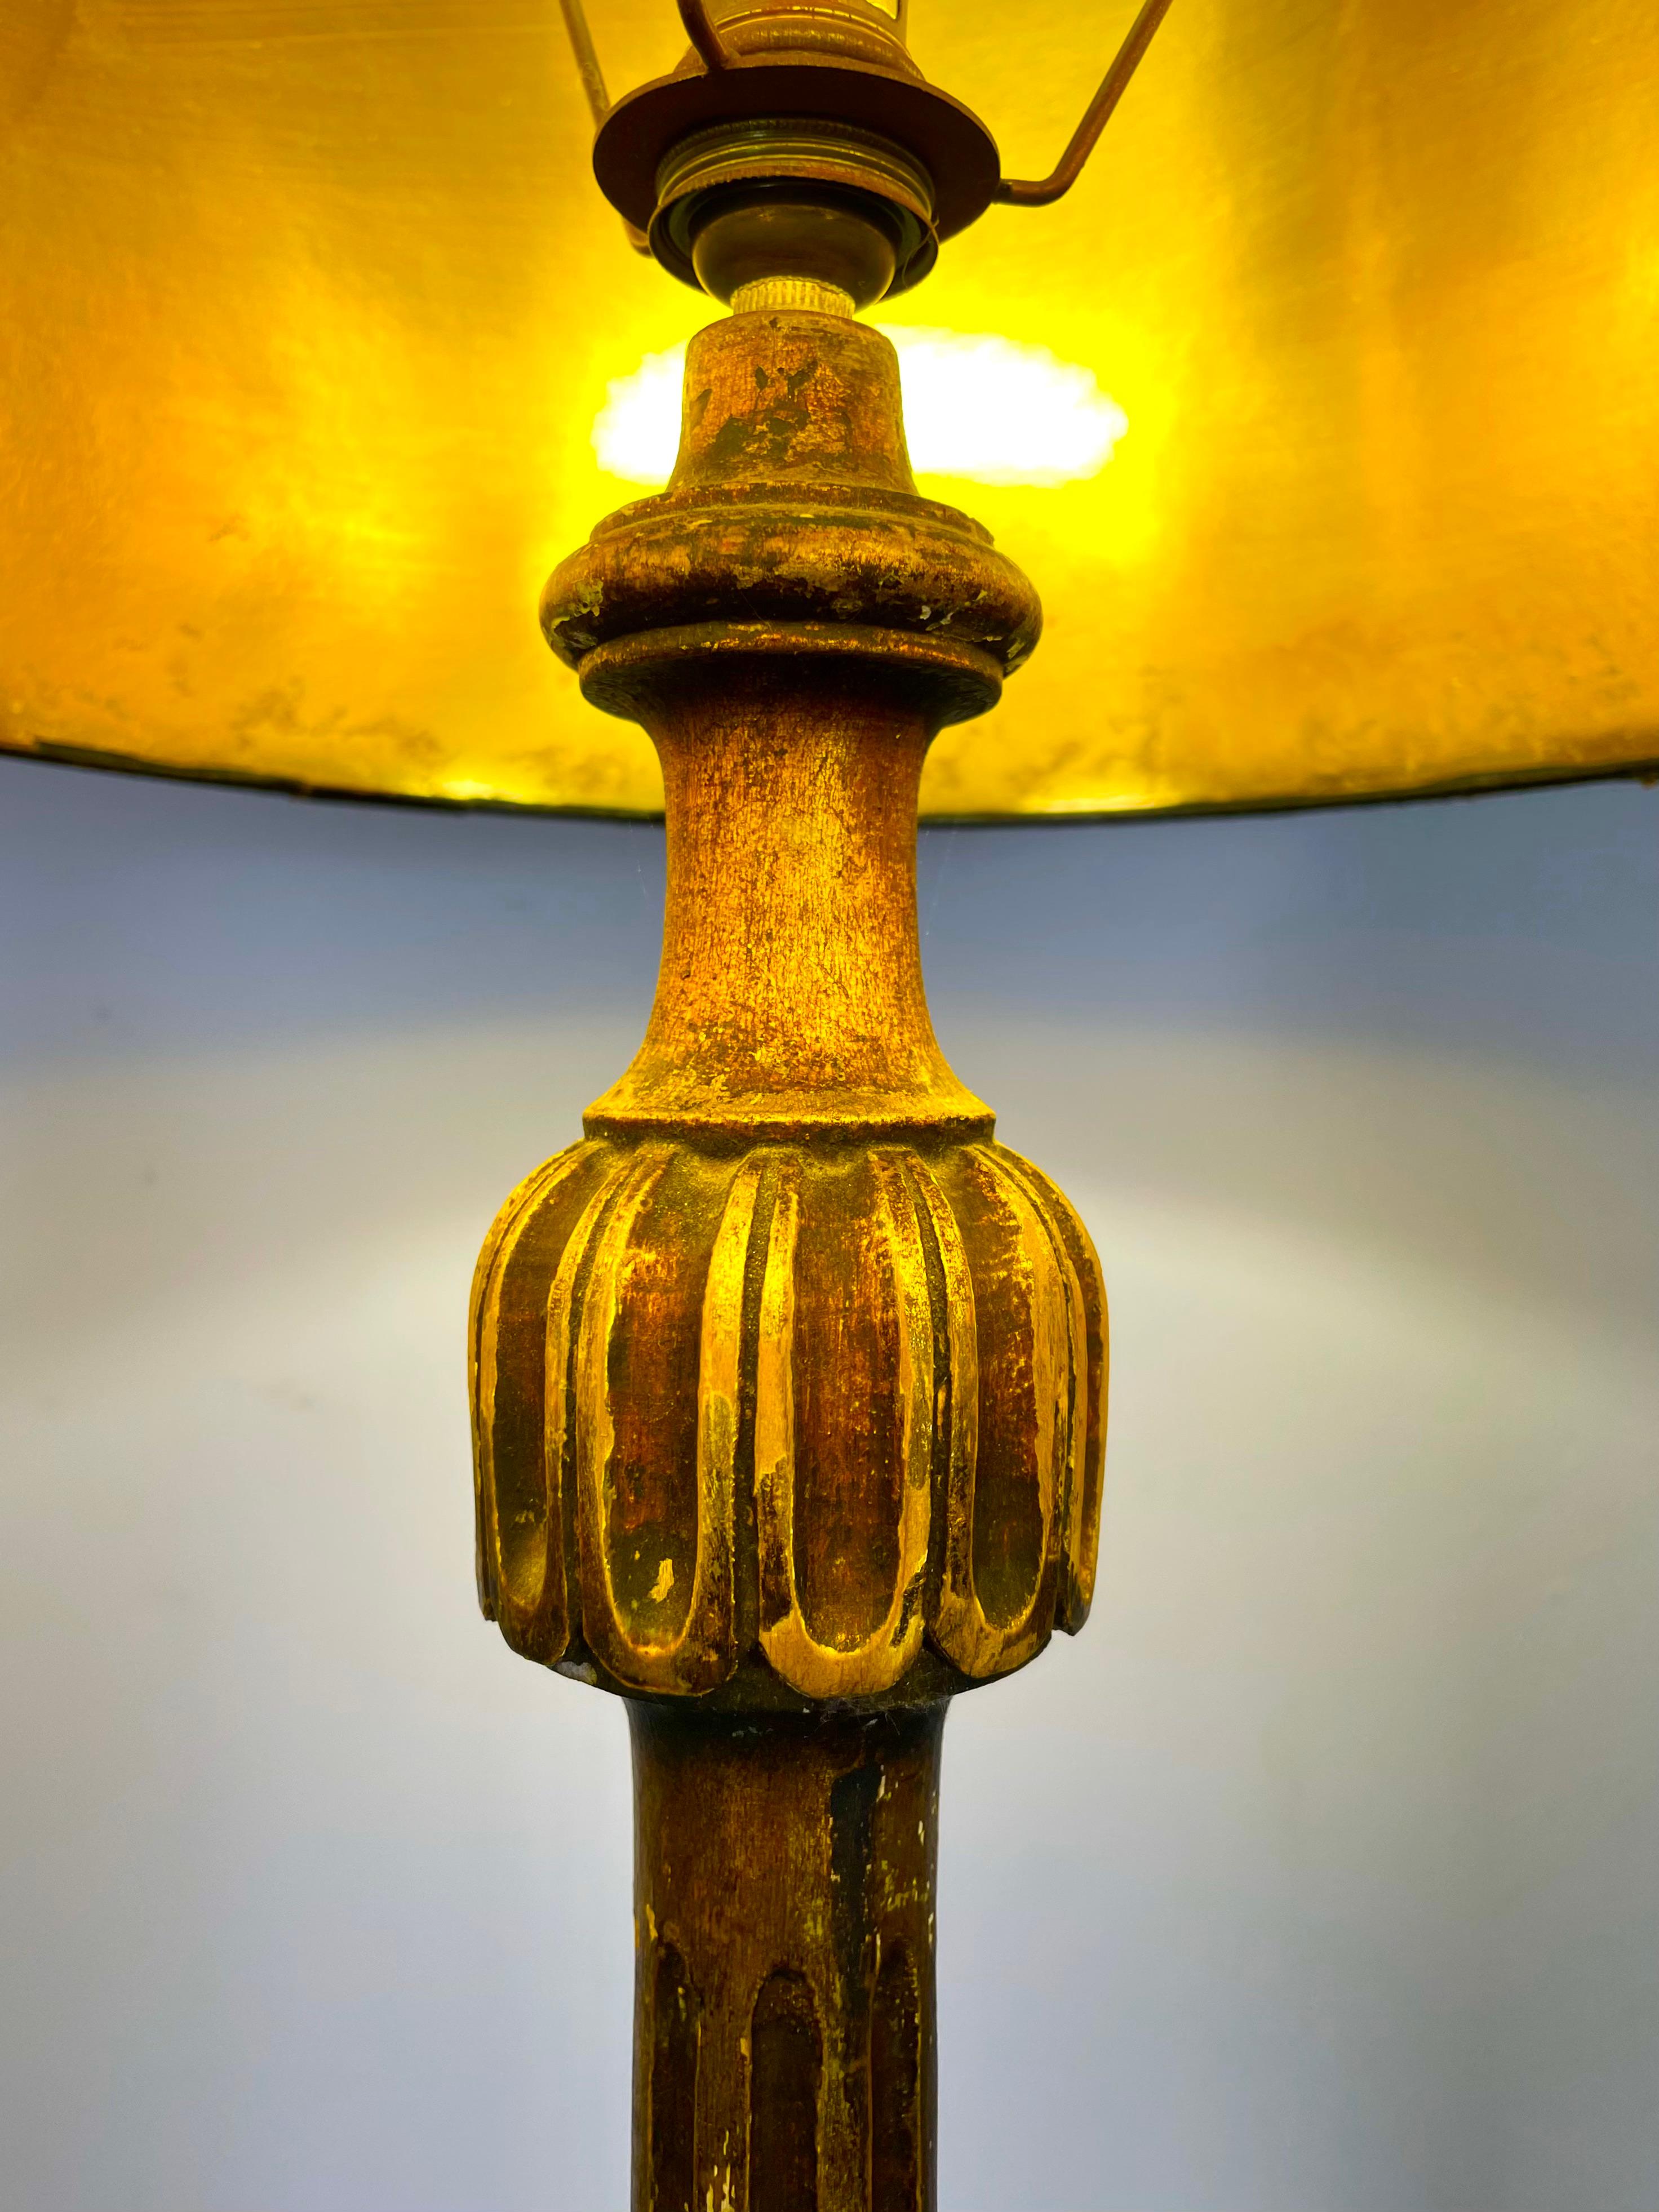 20th Century French Floor Lamp in Fluted and Gilded Wood, Louis XVI Style, 20t Century For Sale